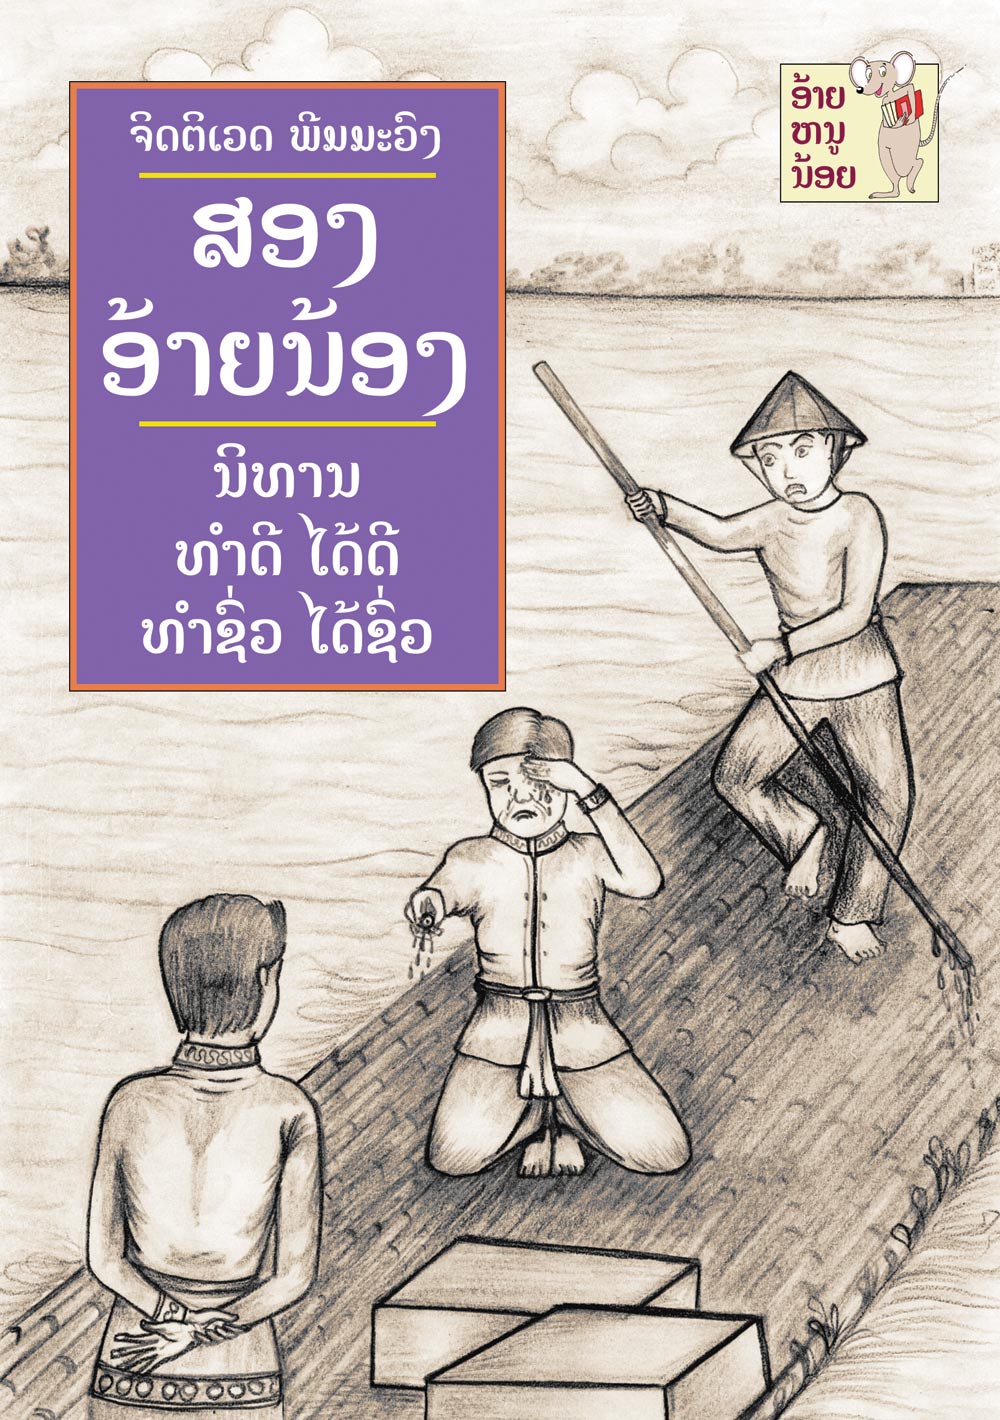 Two Brothers large book cover, published in Lao language